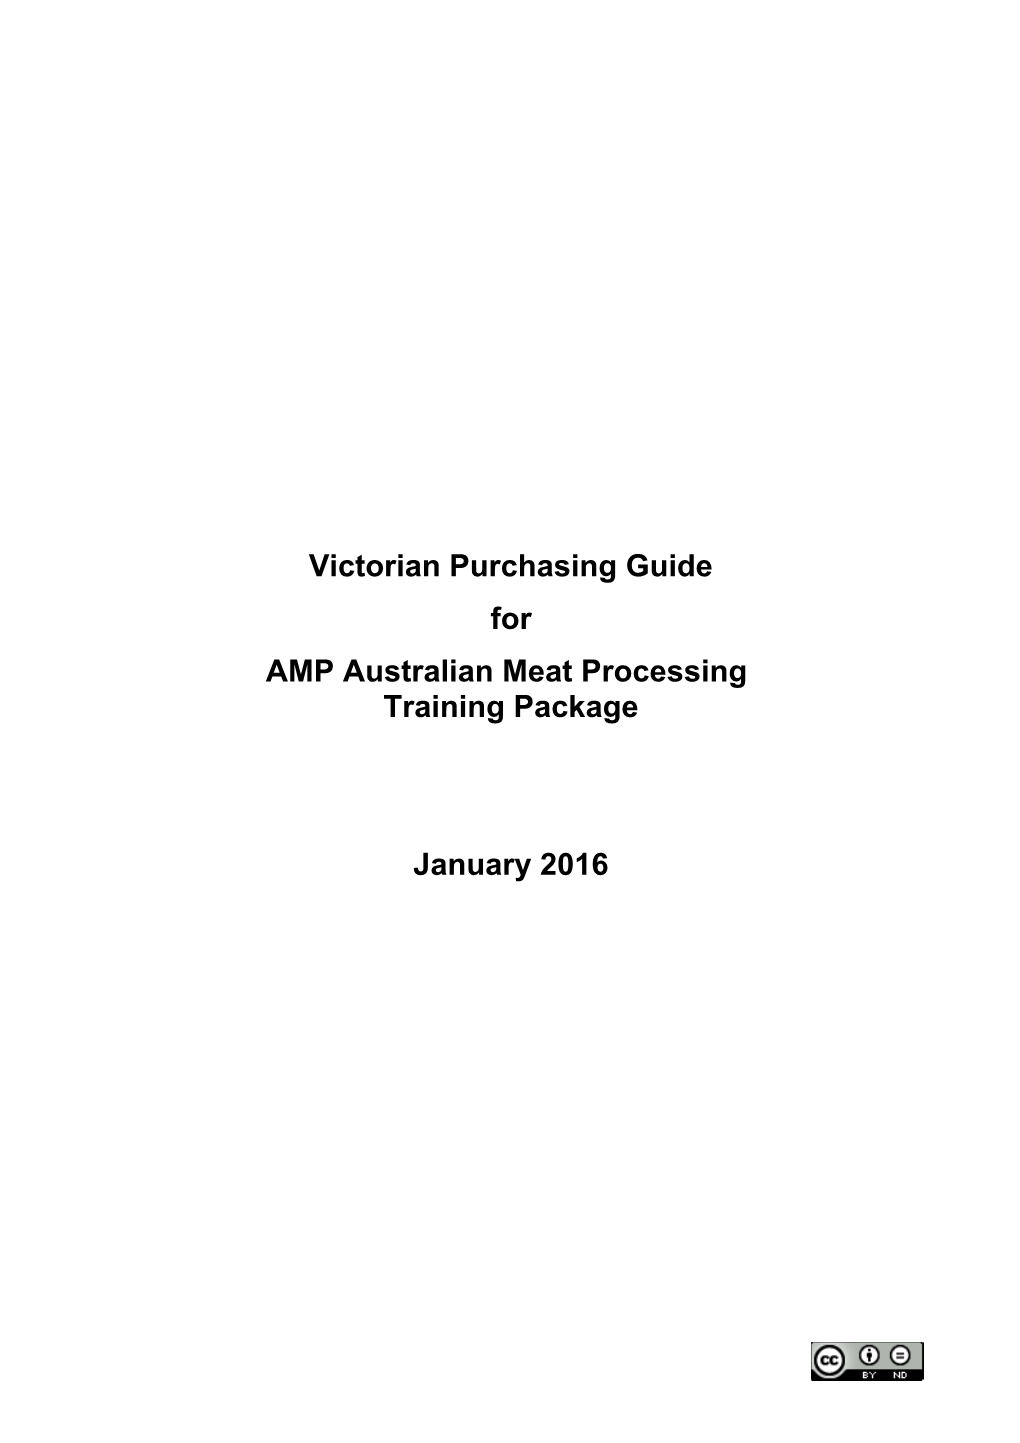 Victorian Purchasing Guide for AMP Australian Meat Processing